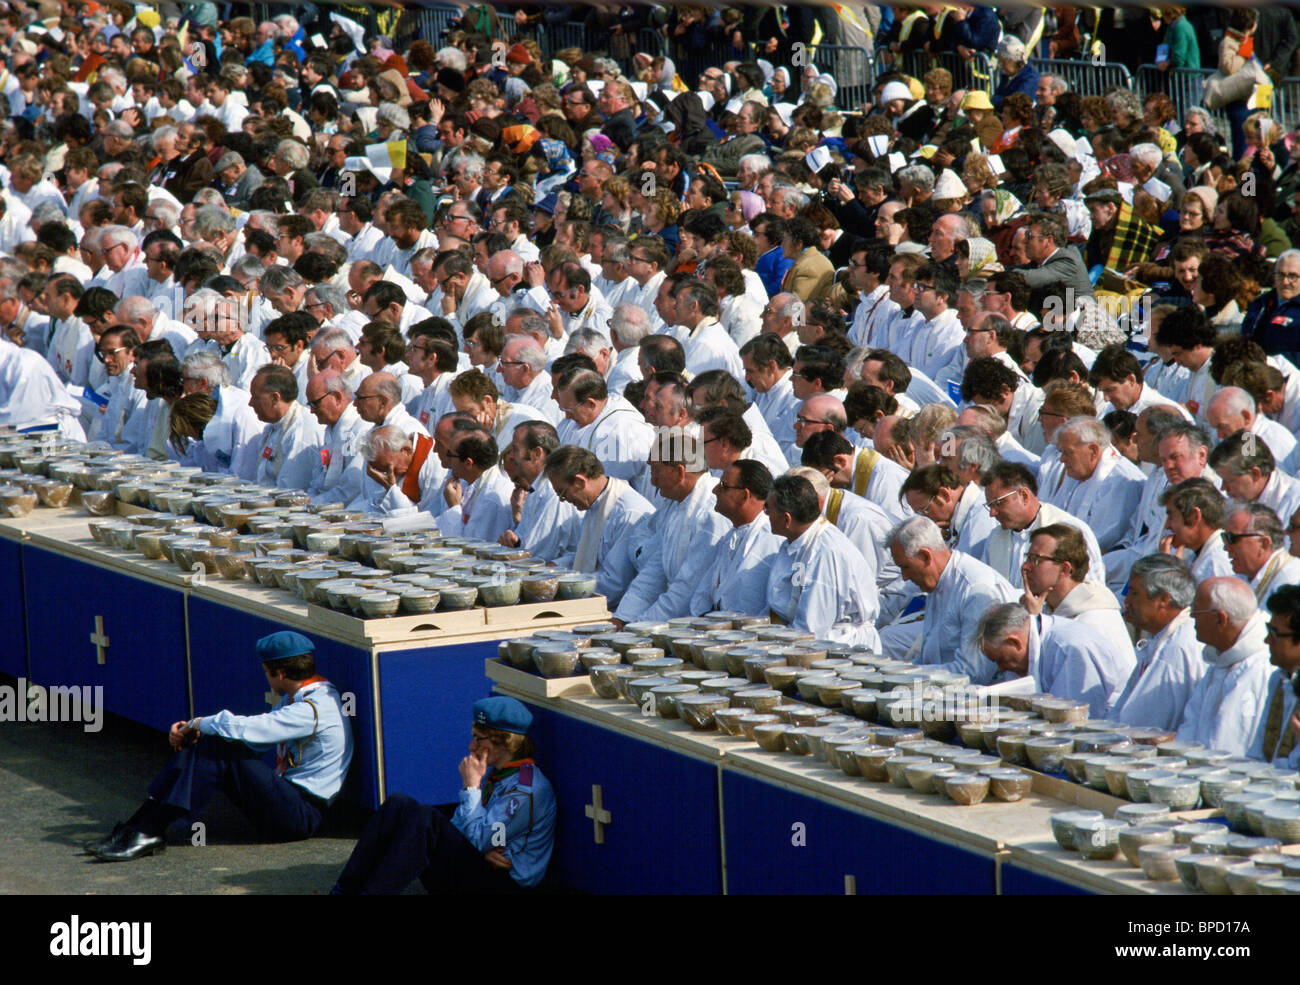 Pope John Paul II Visit to Ireland - priests ready to give out Holy Communion During Mass at Knock, Ireland Stock Photo